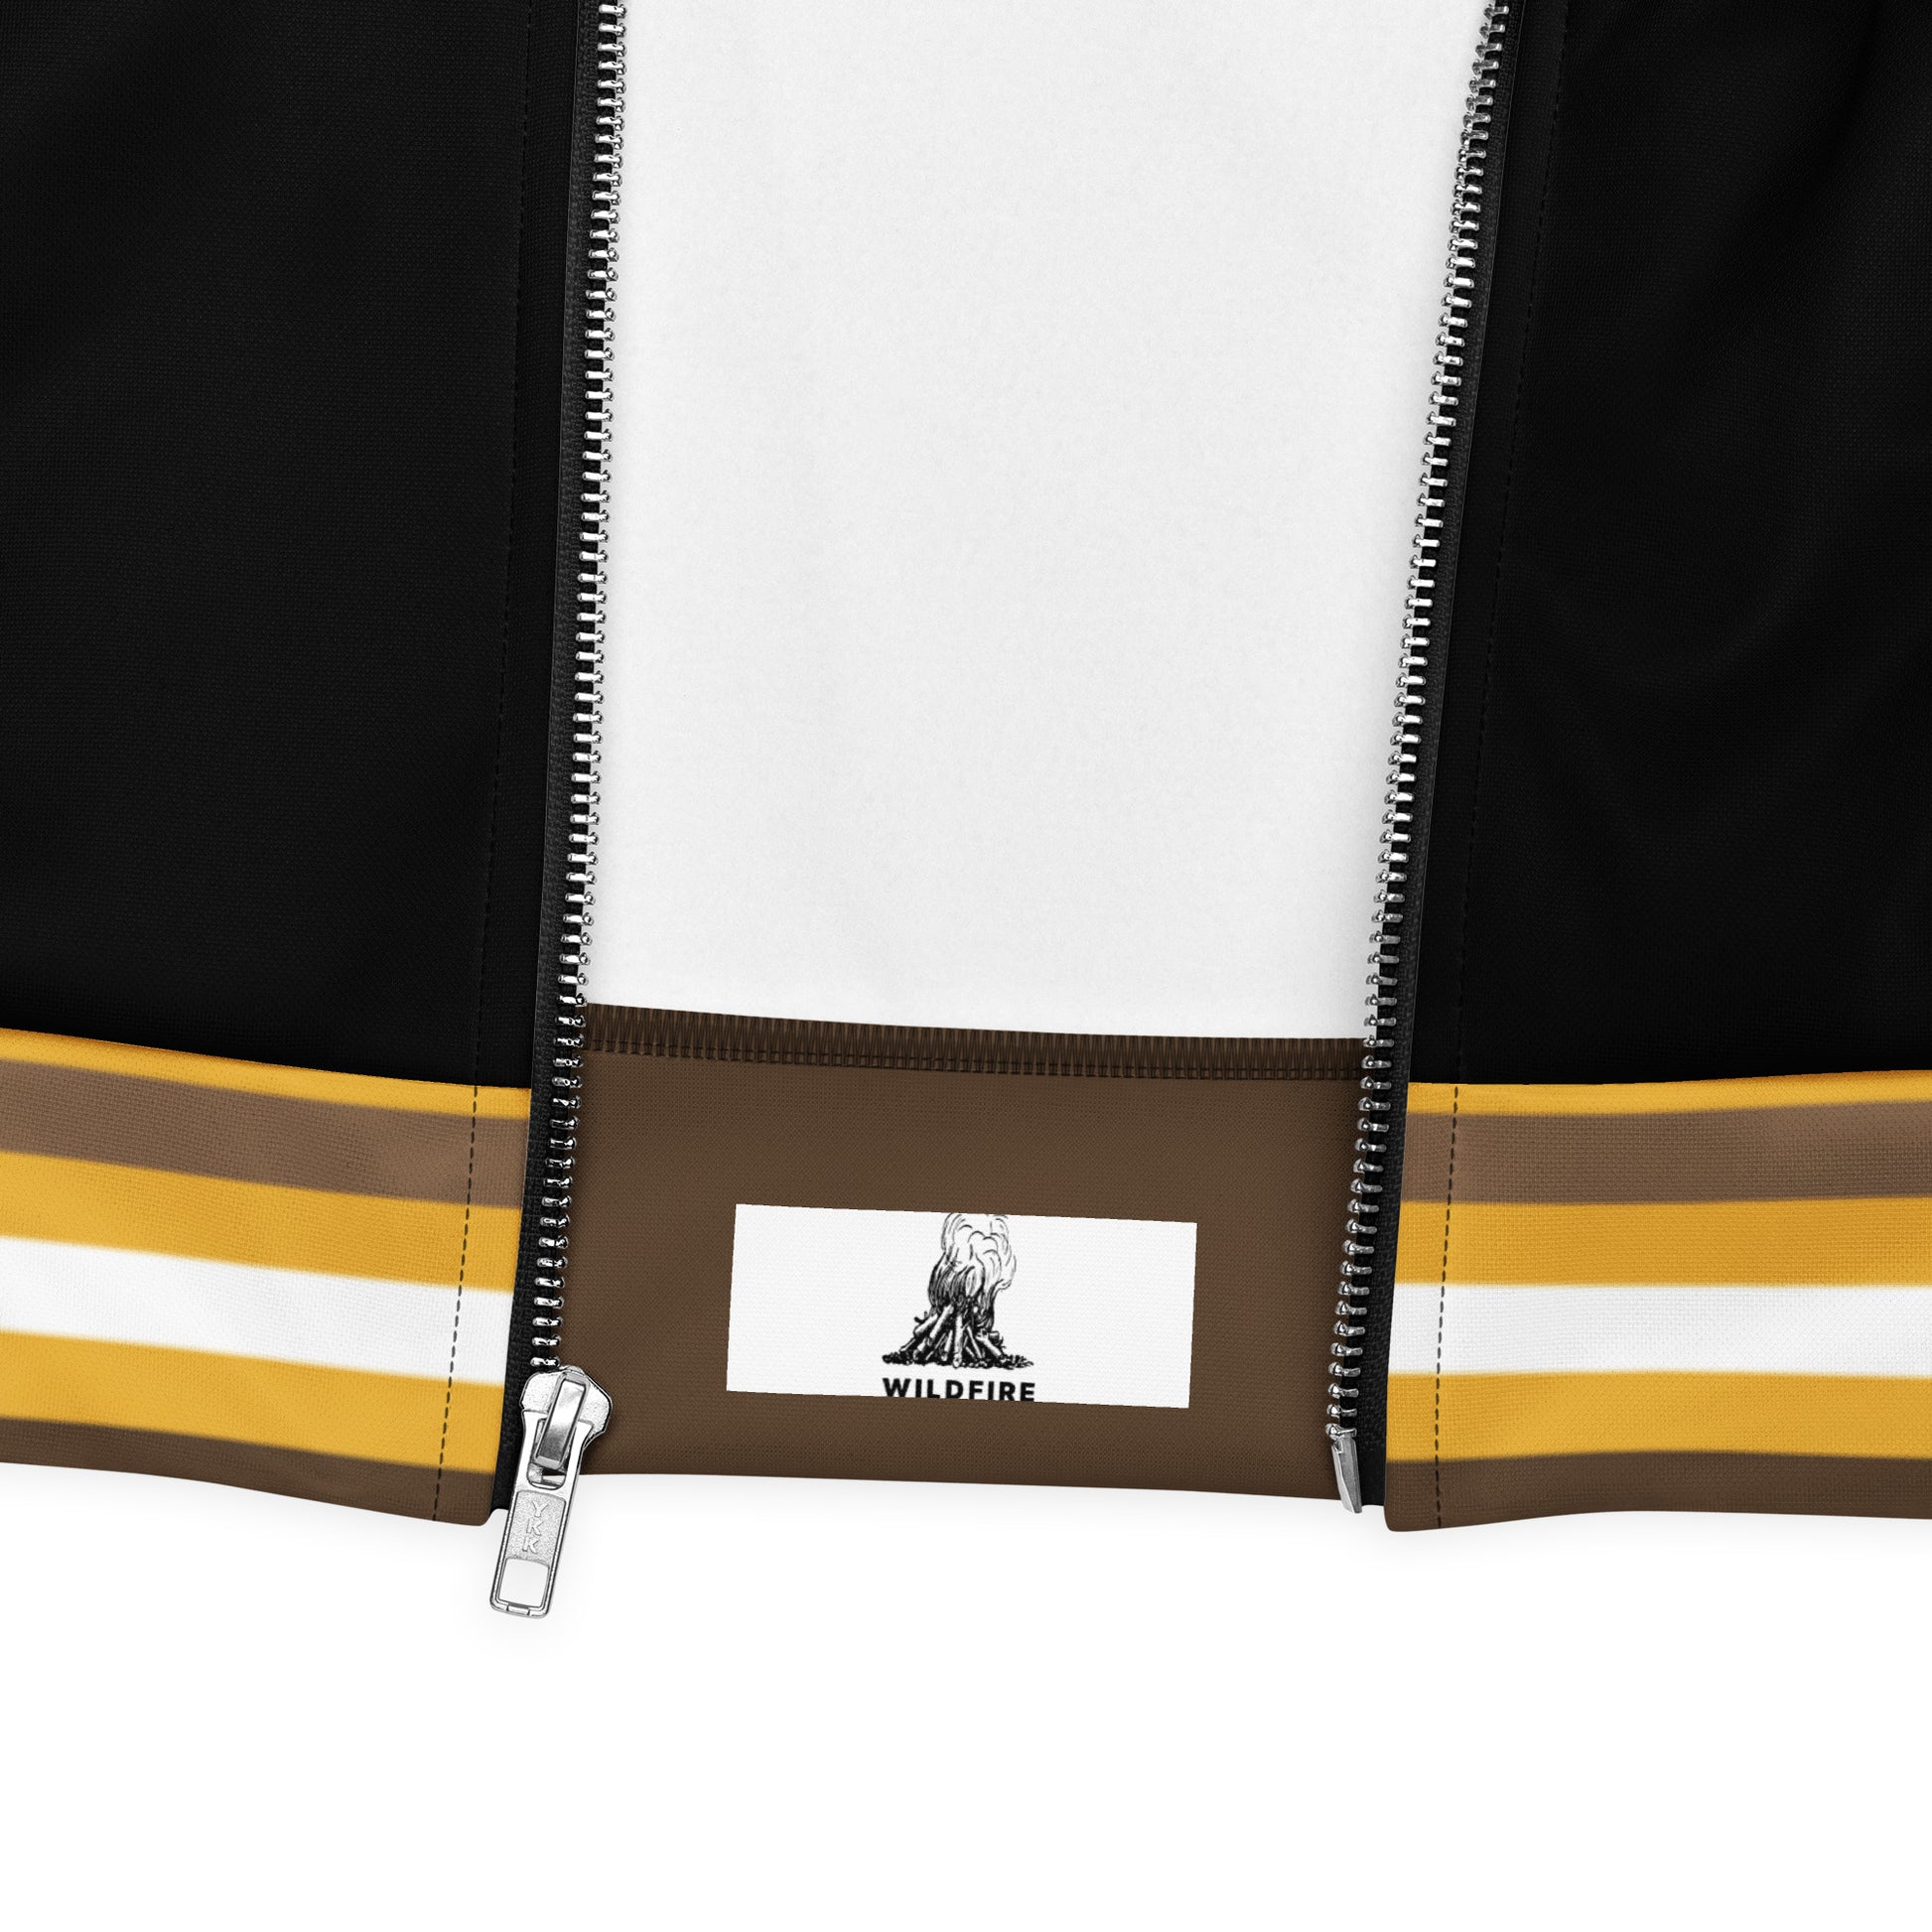 Wildfire Cigars Camp Counselor all over print light jacket in black white brown and gold zoomed in on inside label